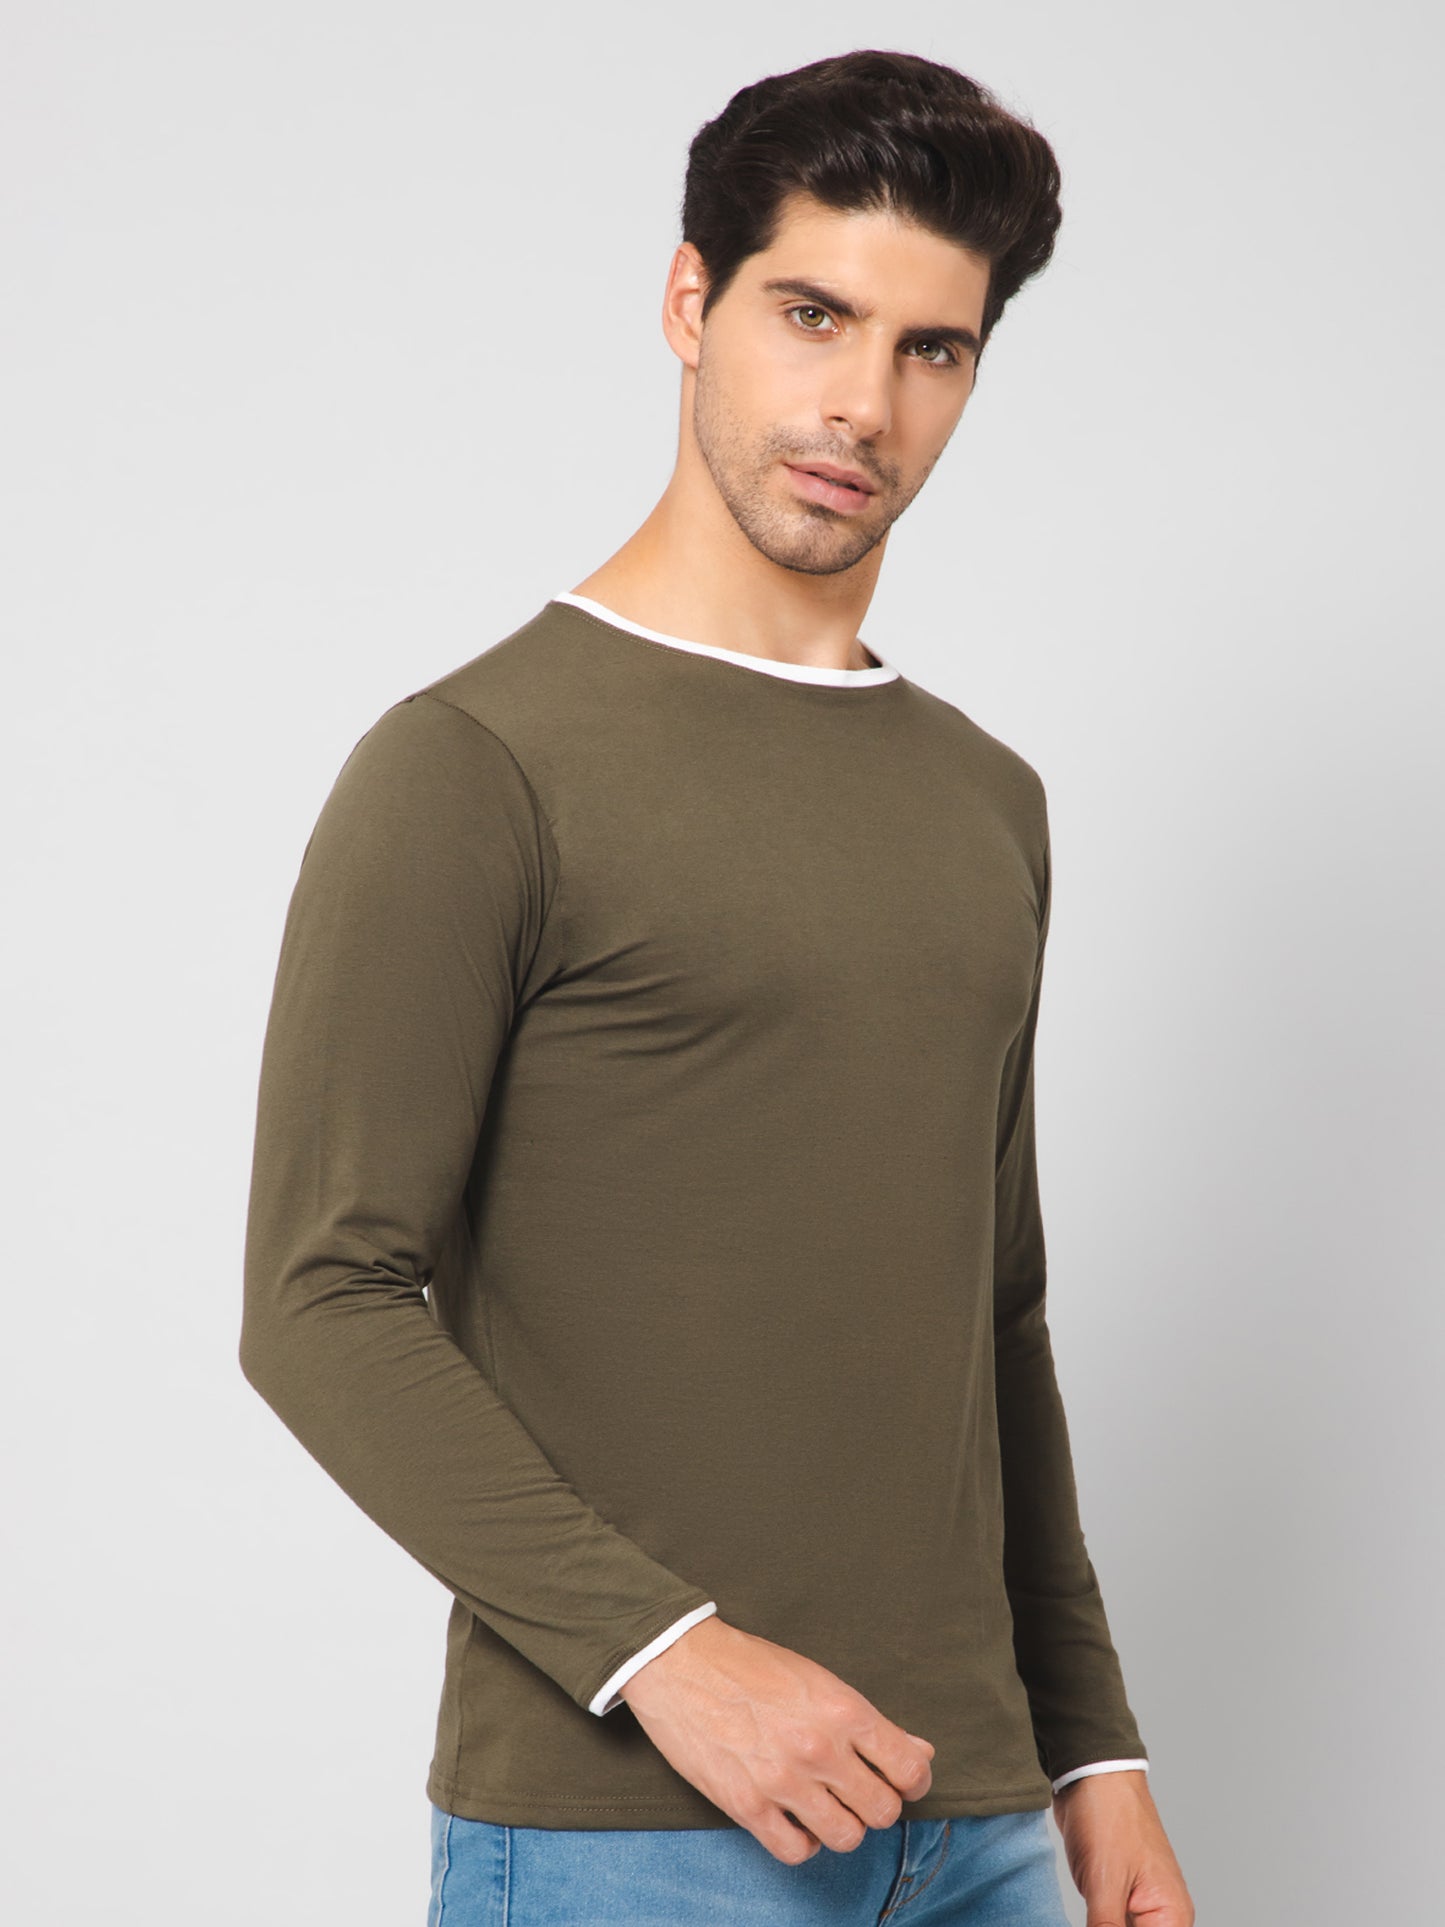 Cotton Olive Green Full Sleeves T-shirt